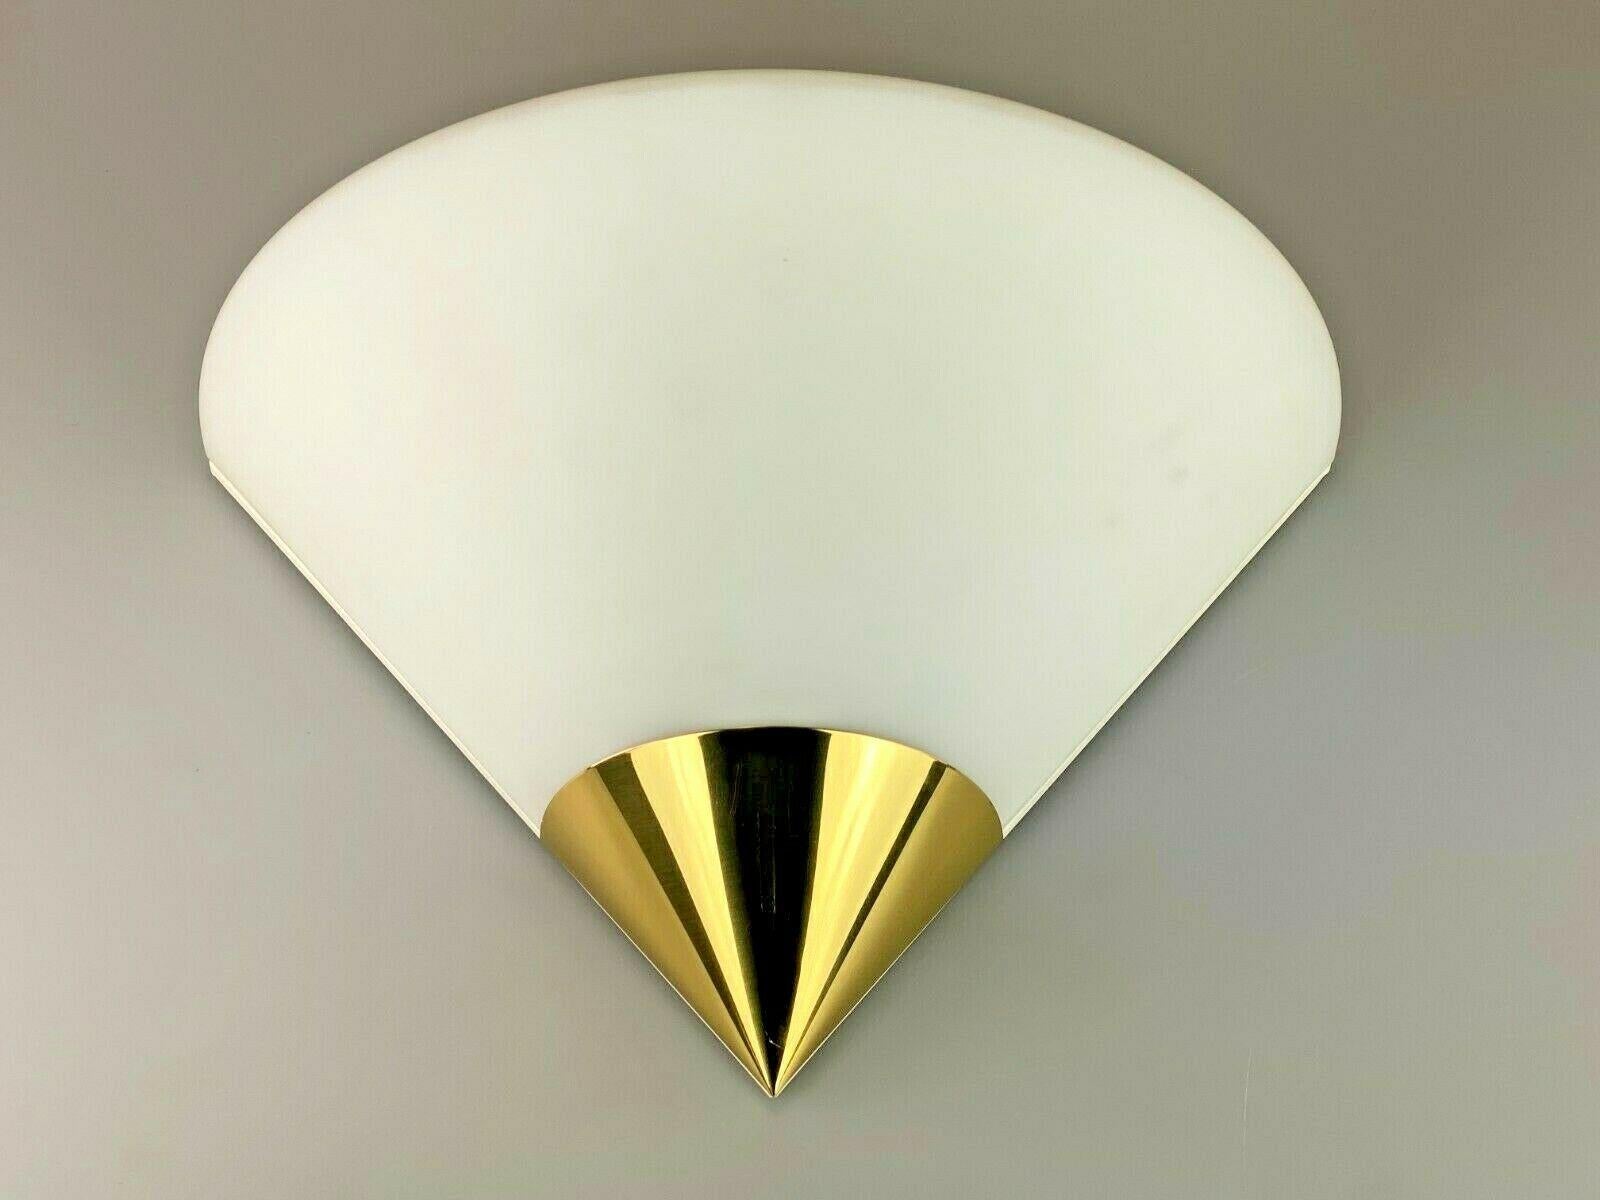 60s 70s lamp light wall lamp Limburg Plafoniere Space Age Design 60s

Object: wall lamp

Manufacturer: Glashütte Limburg

Condition: good - vintage

Age: around 1960-1970

Dimensions:

45cm x 28cm x 23cm

Other notes:

The pictures